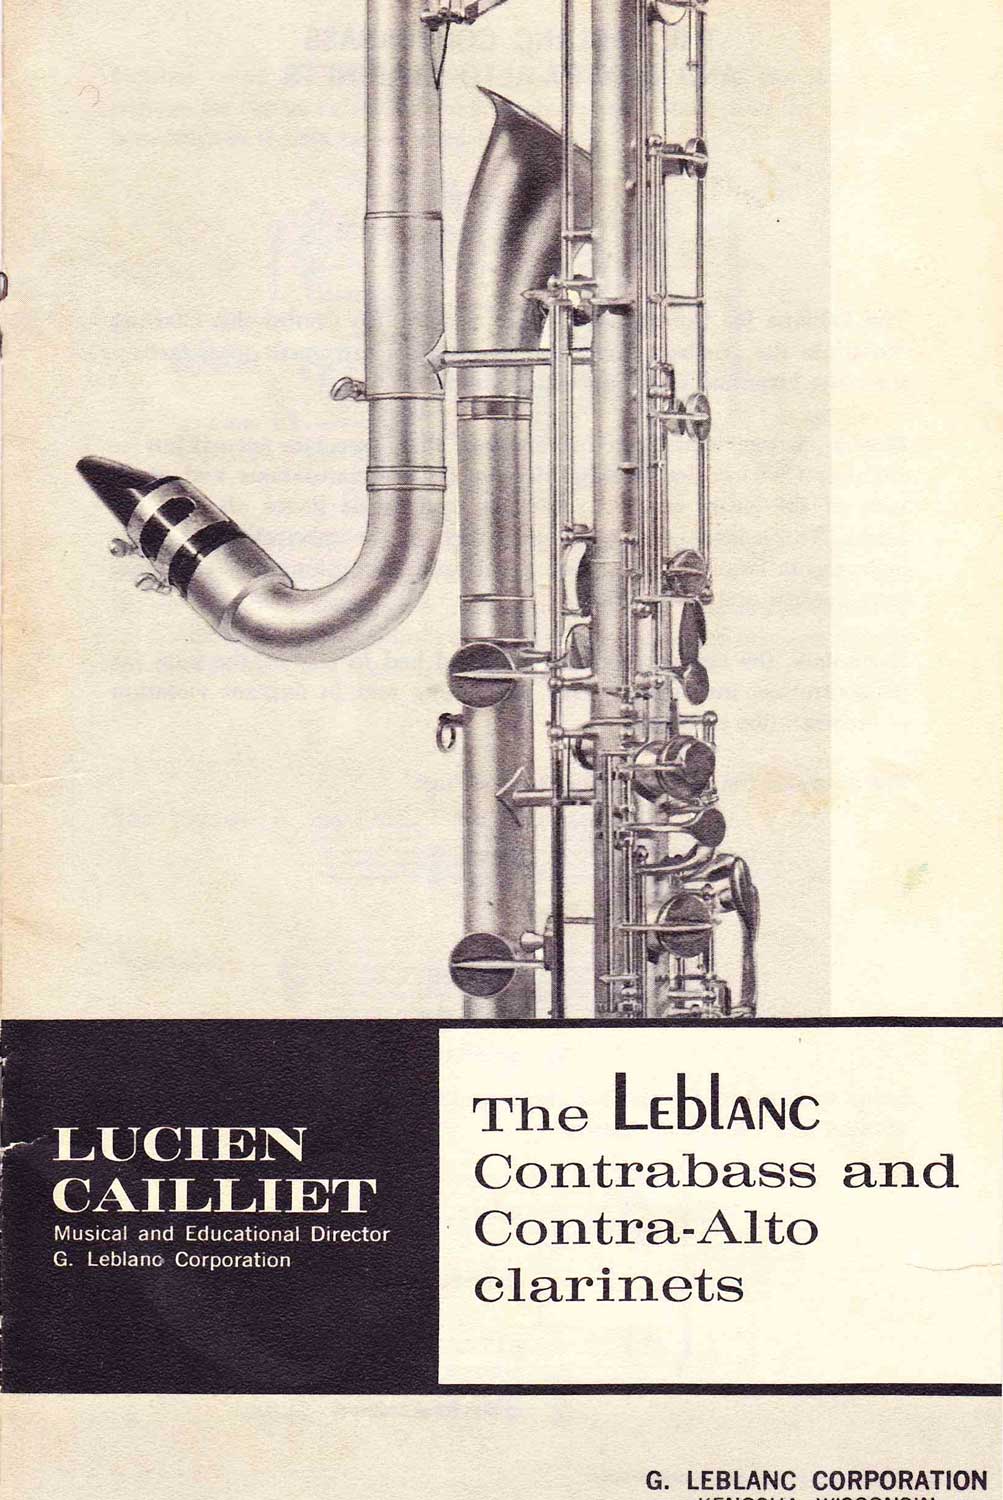 Educational booklet to begin the LEBLANC contrabass clarinet or contra-alto.